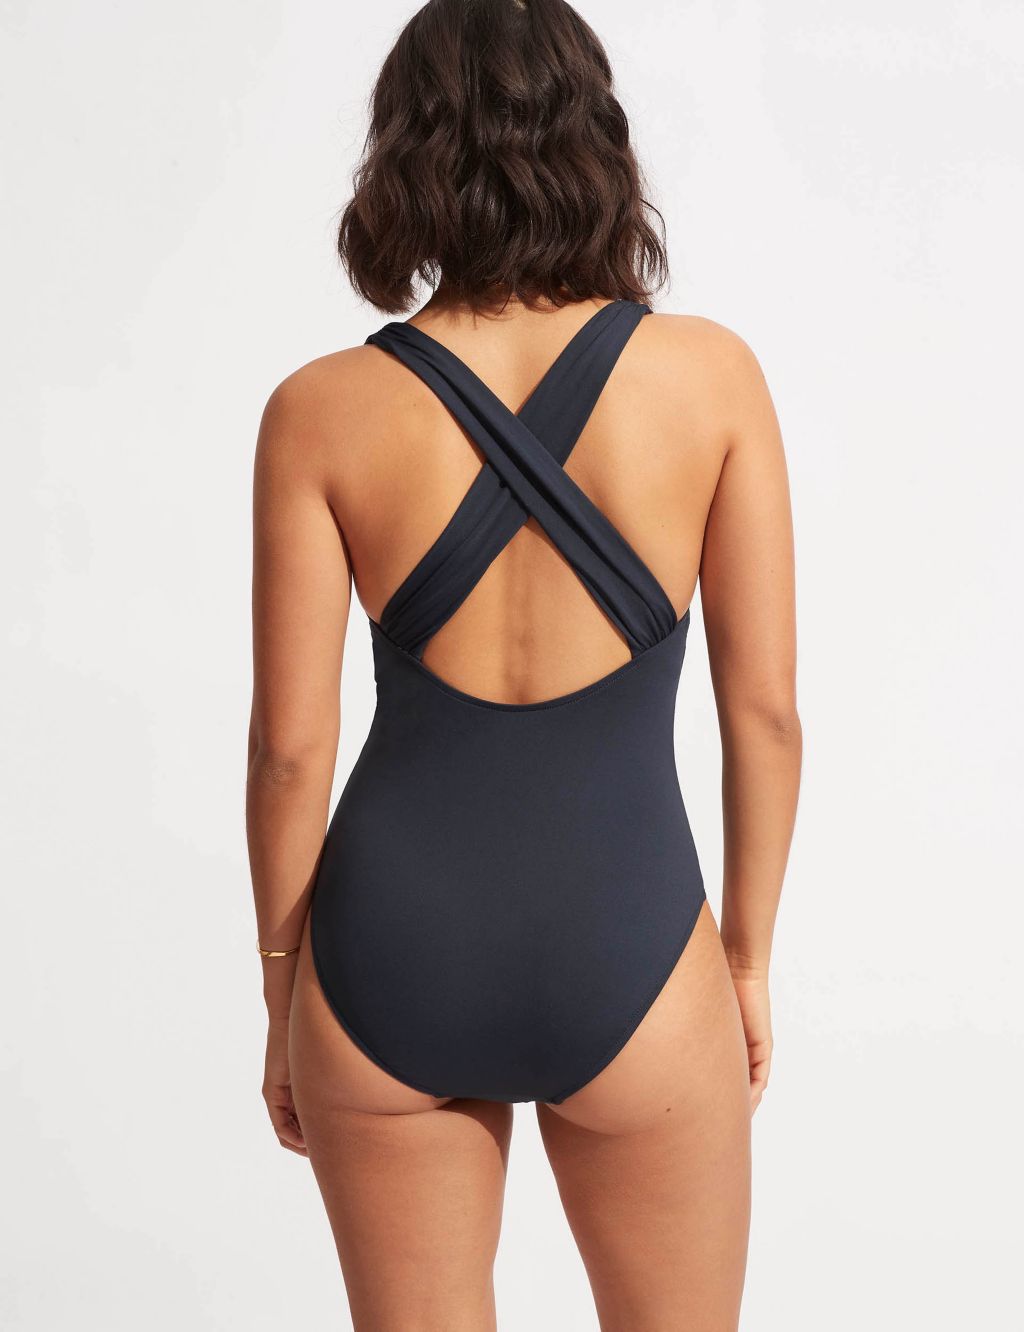 Collective Padded Plunge Swimsuit image 4